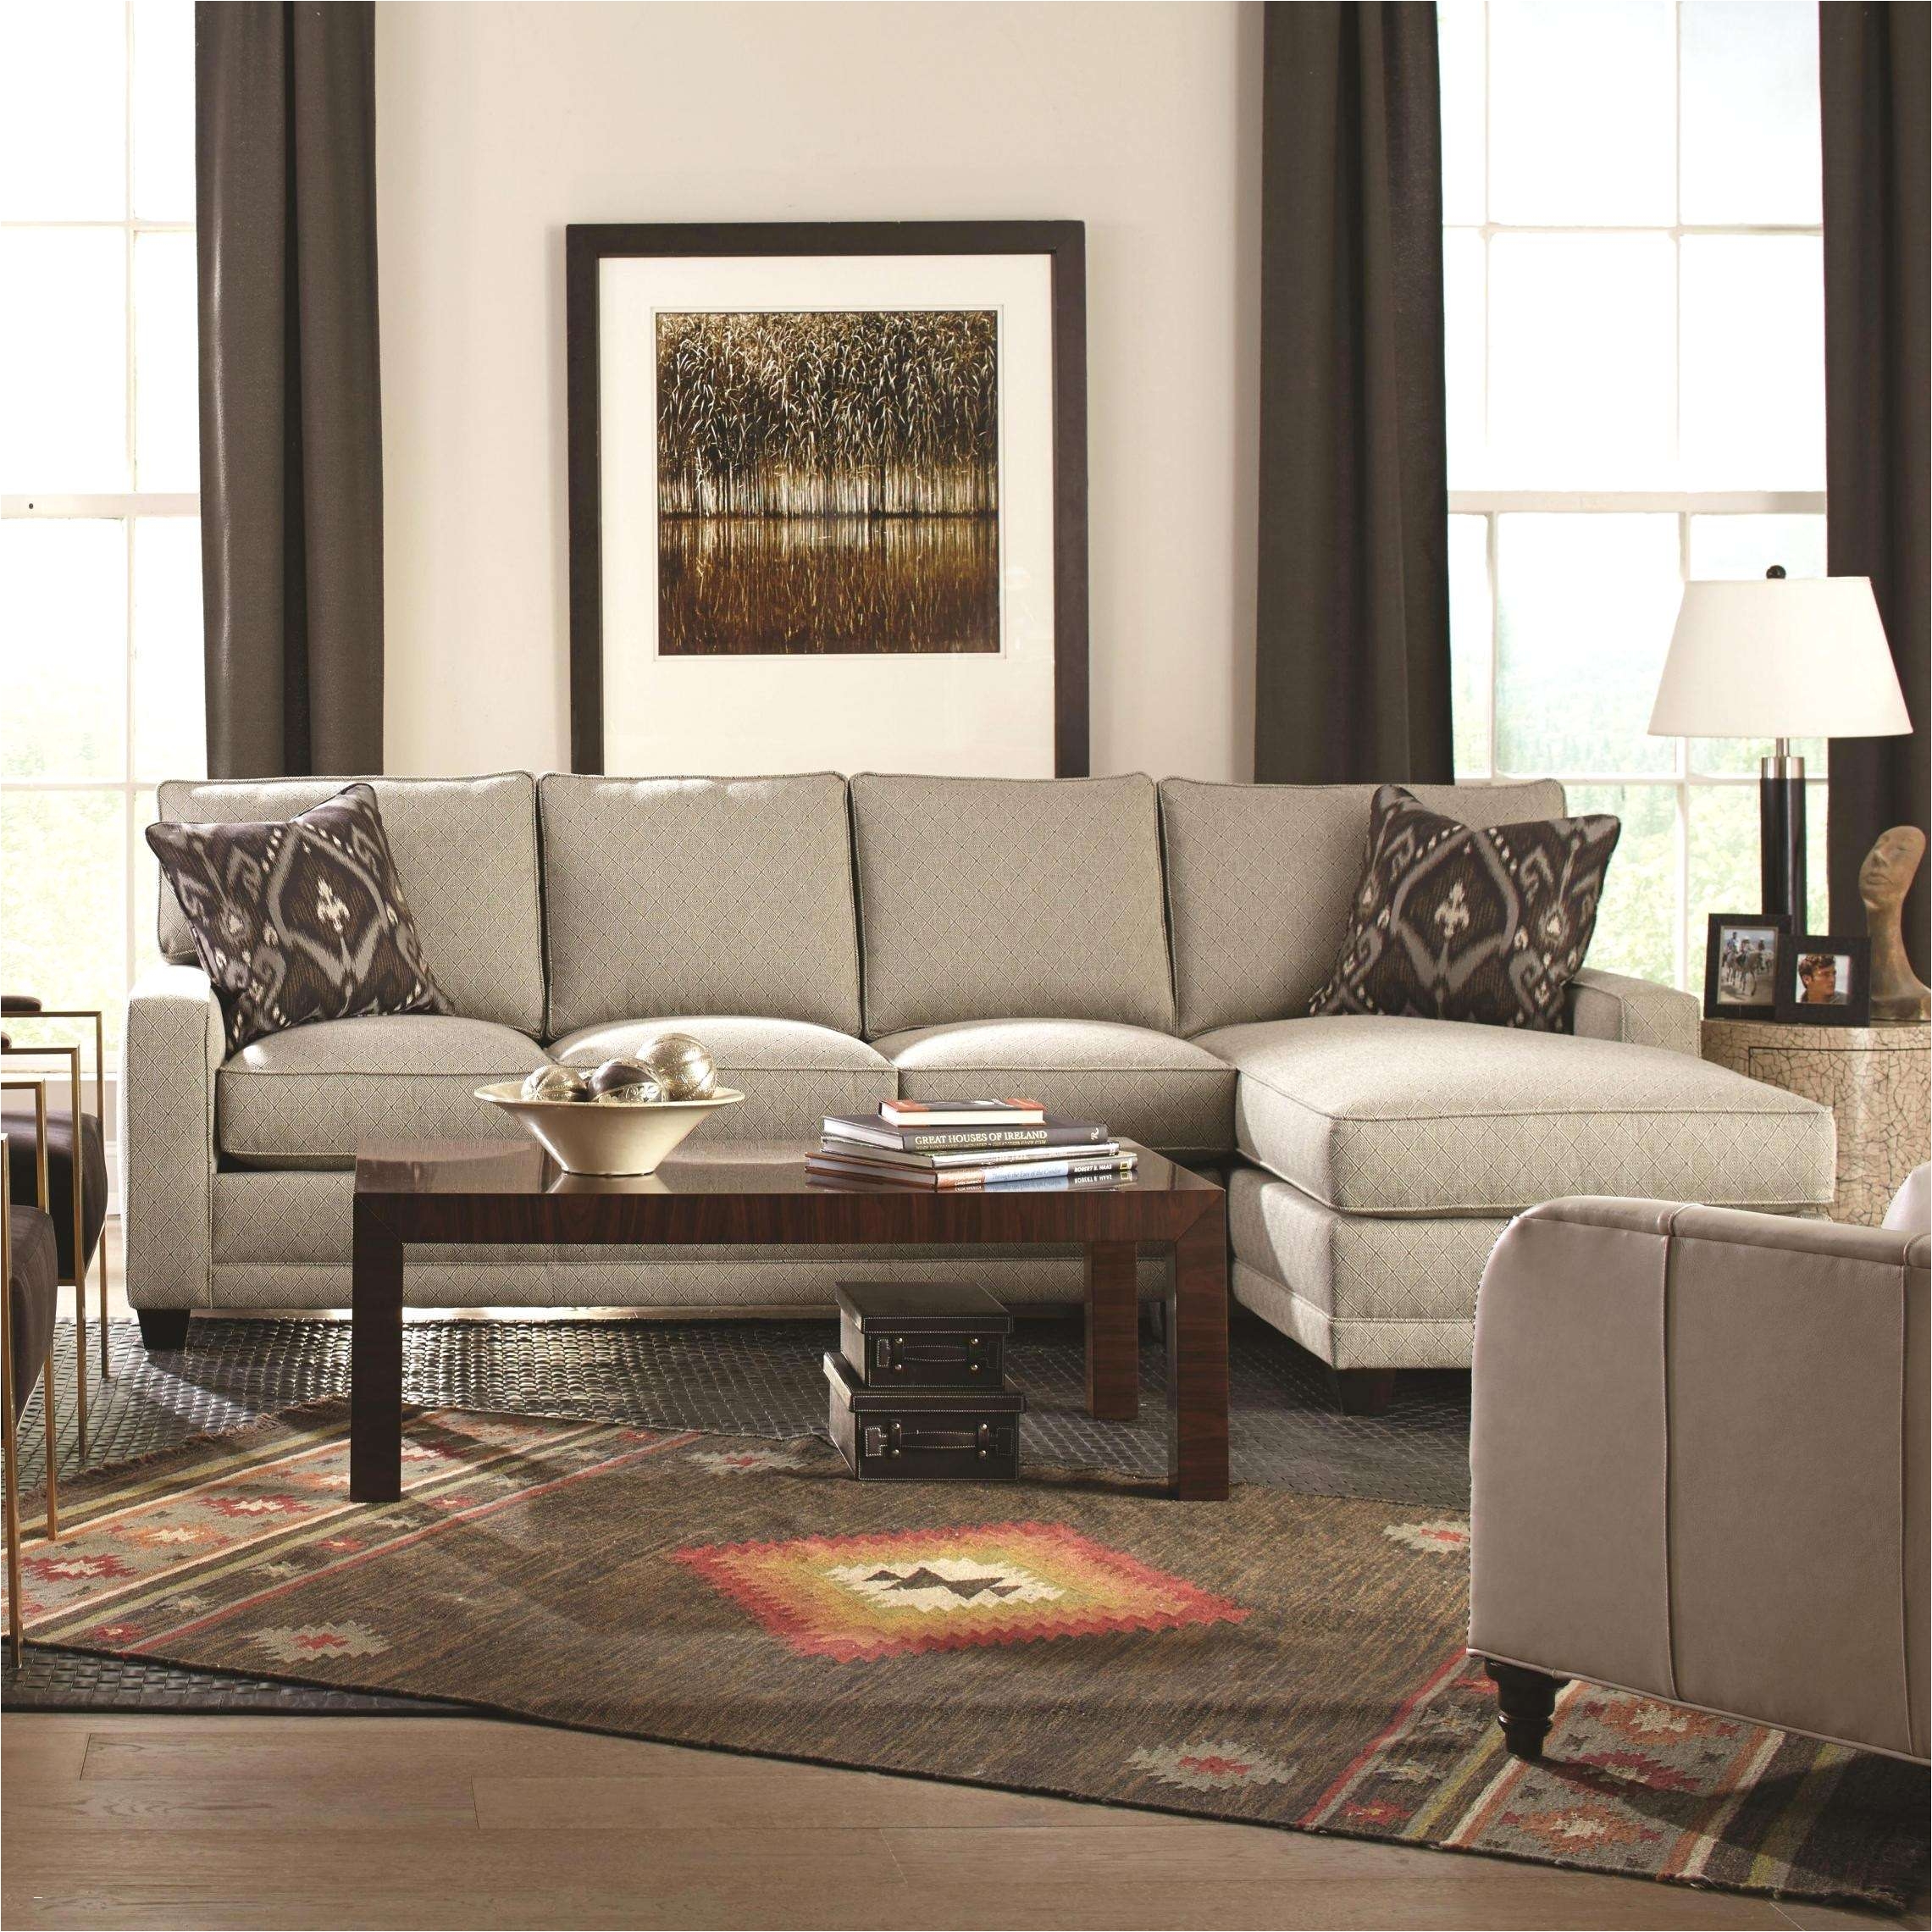 living room couches lovable living room ideas with sectional sofas beautiful sectional couch 0d